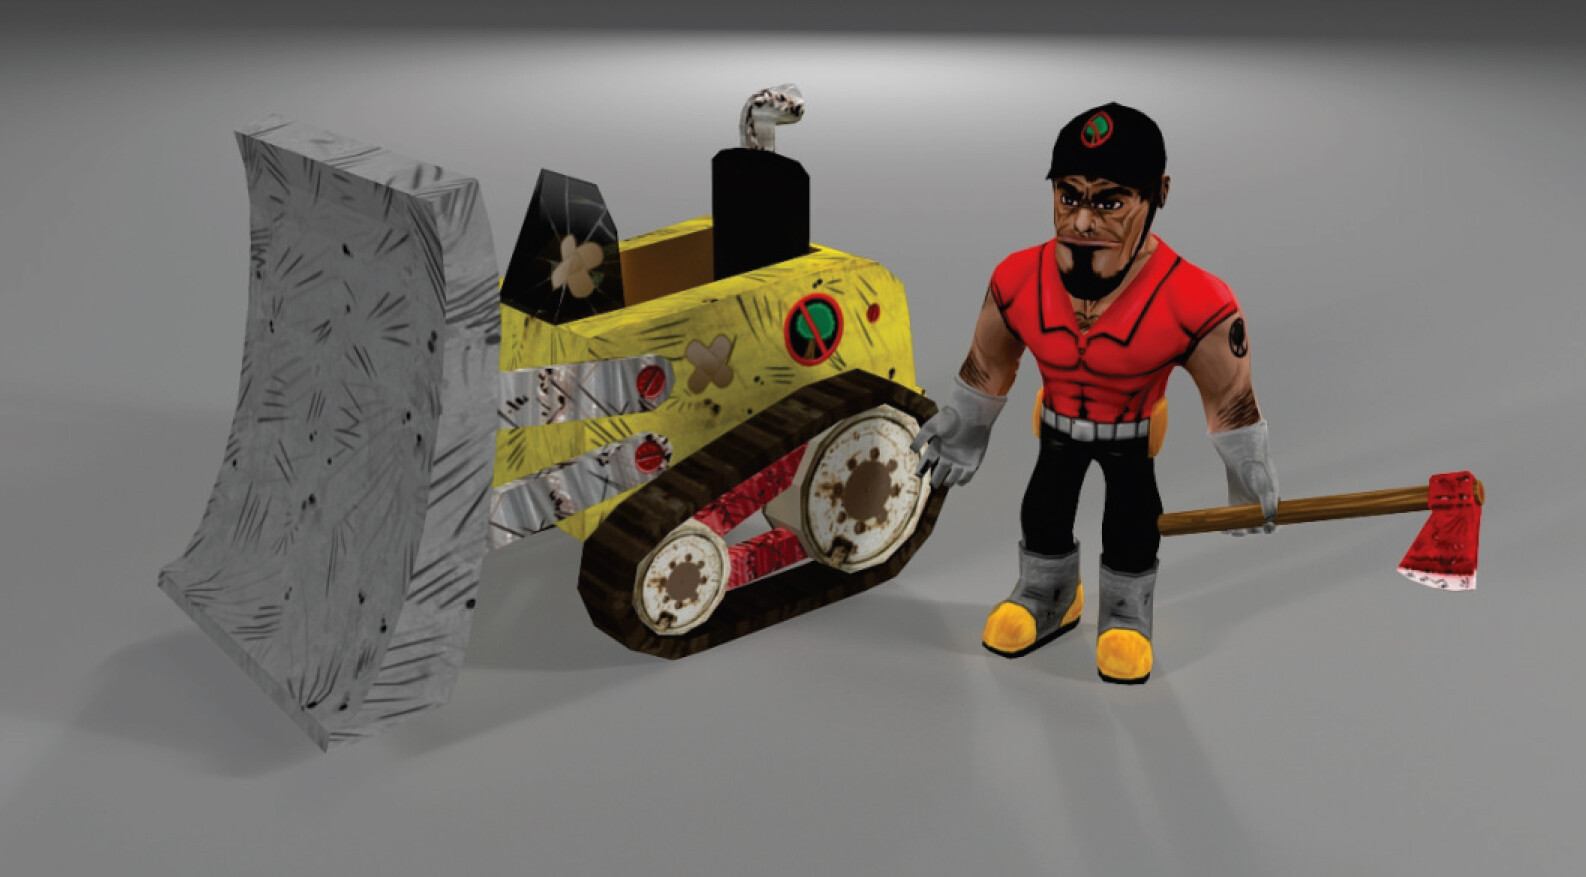 Assets - Tractor "Puf Puf" and evil lumberjack